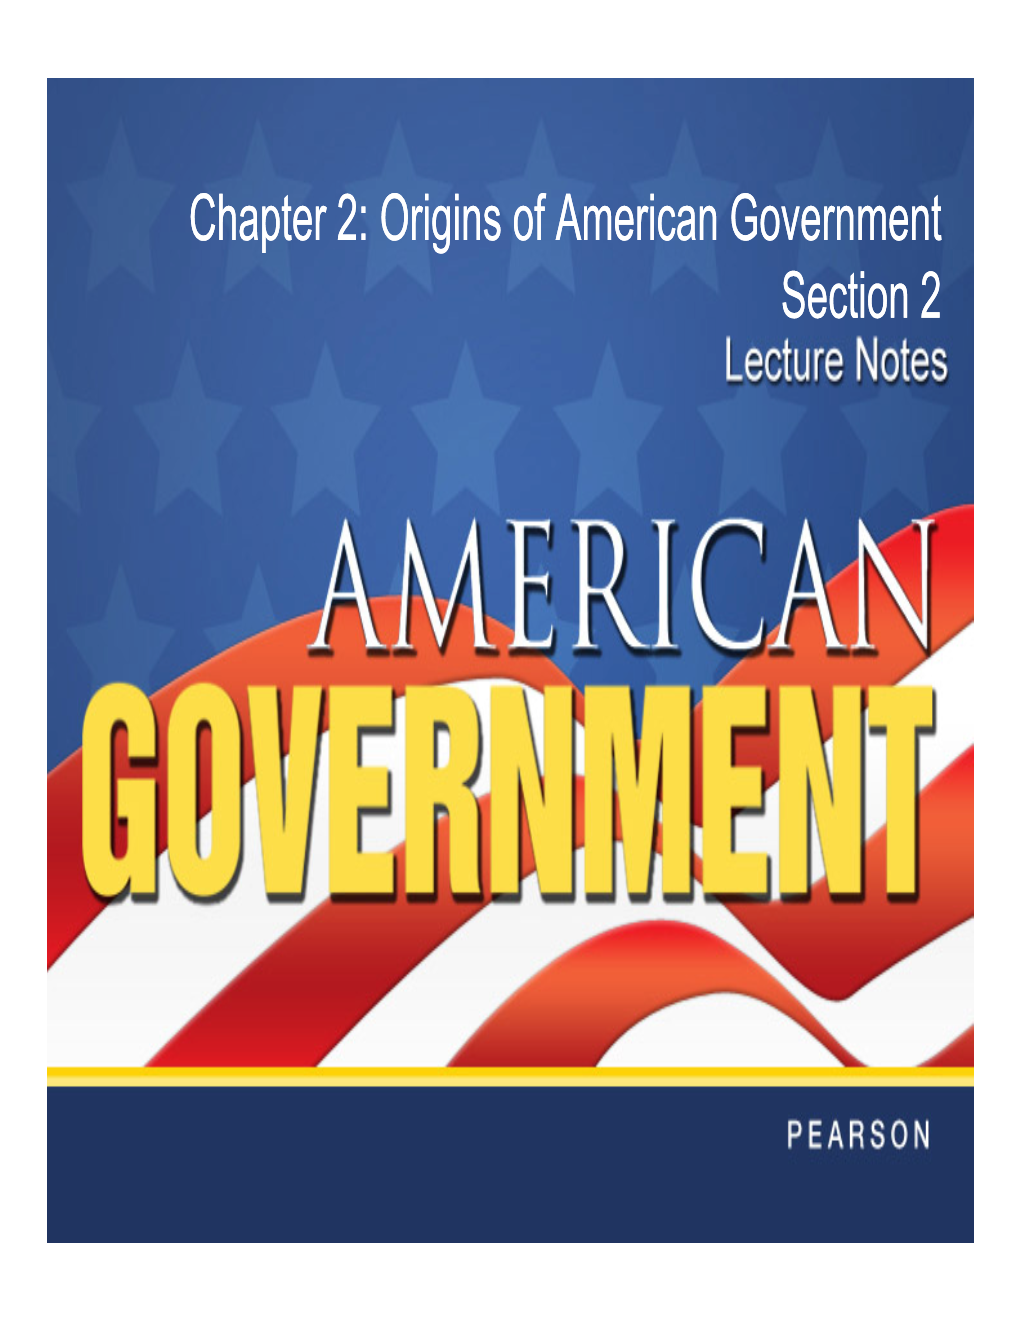 Origins of American Government Section 2 Chapter 2